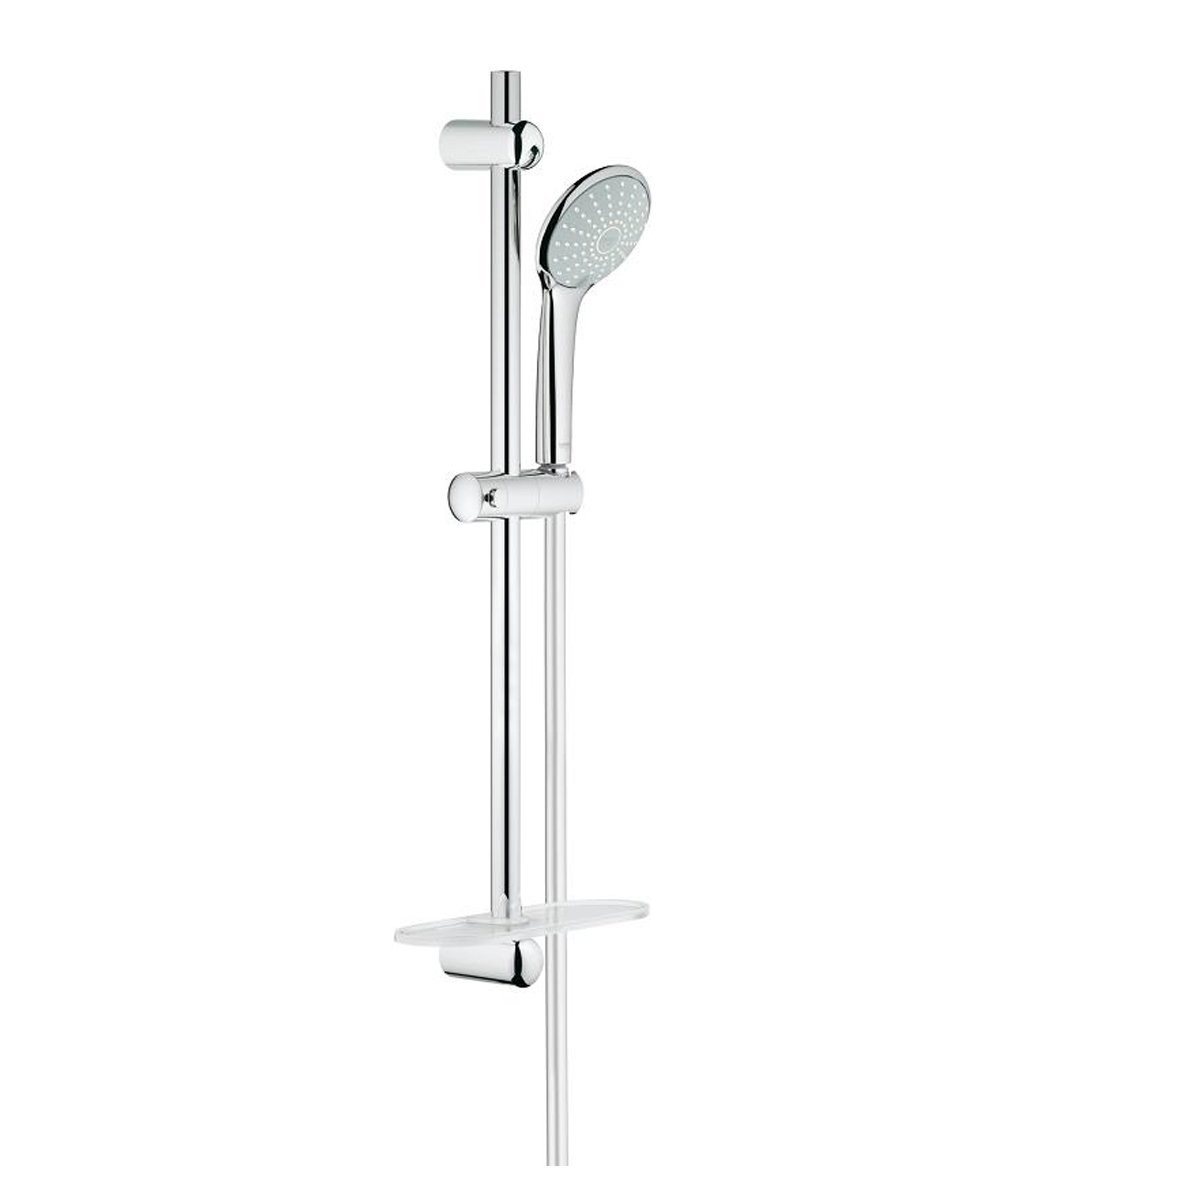 Grohe shower rail model Duo Euphoria with 3-jet hand shower and